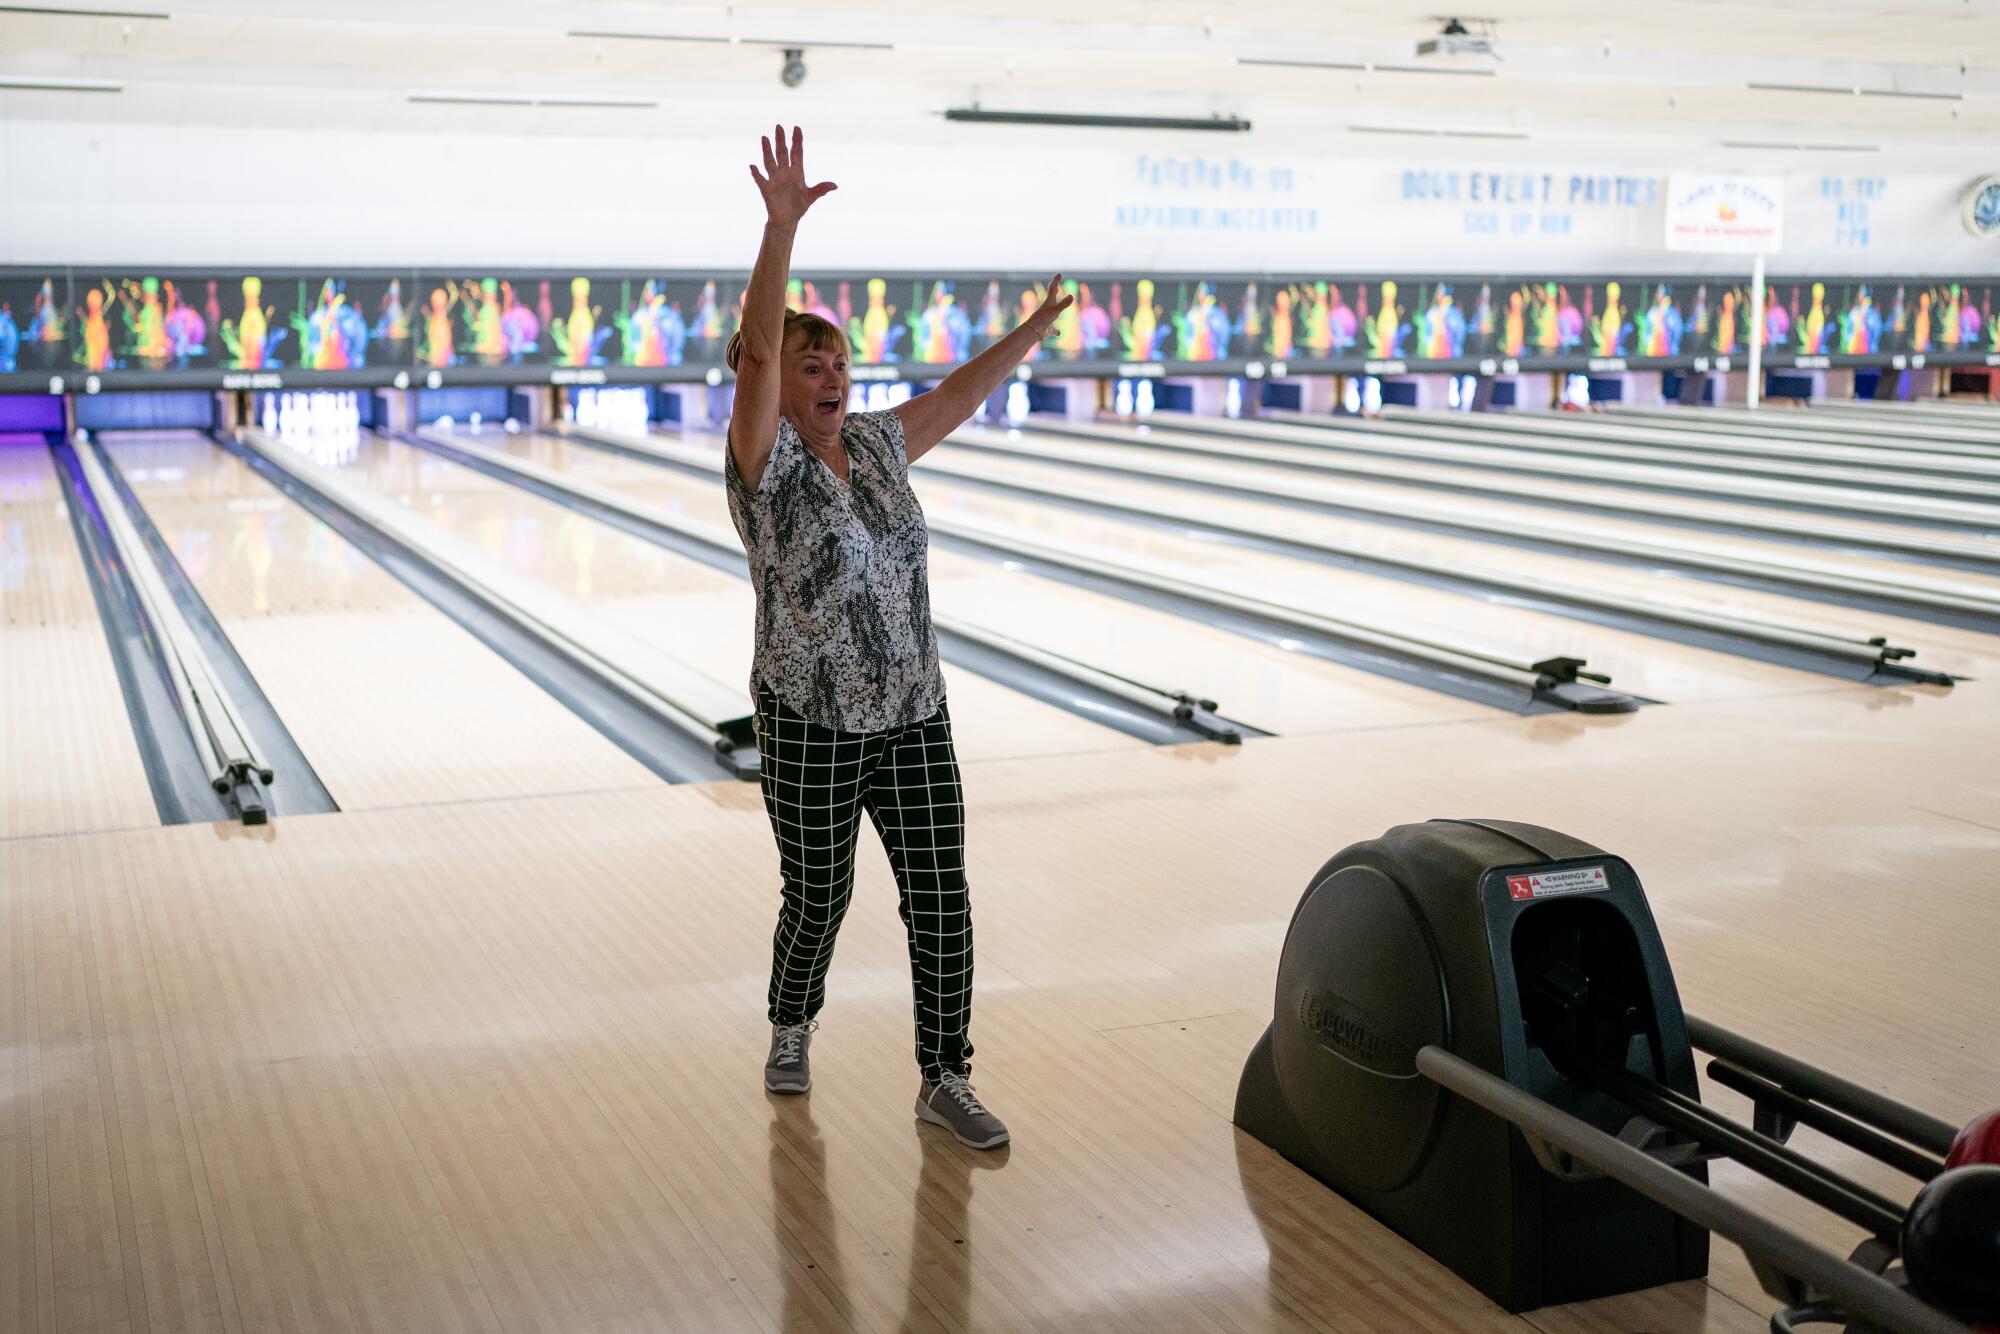 Bowler Roxanne Quirk with her hands in the air.